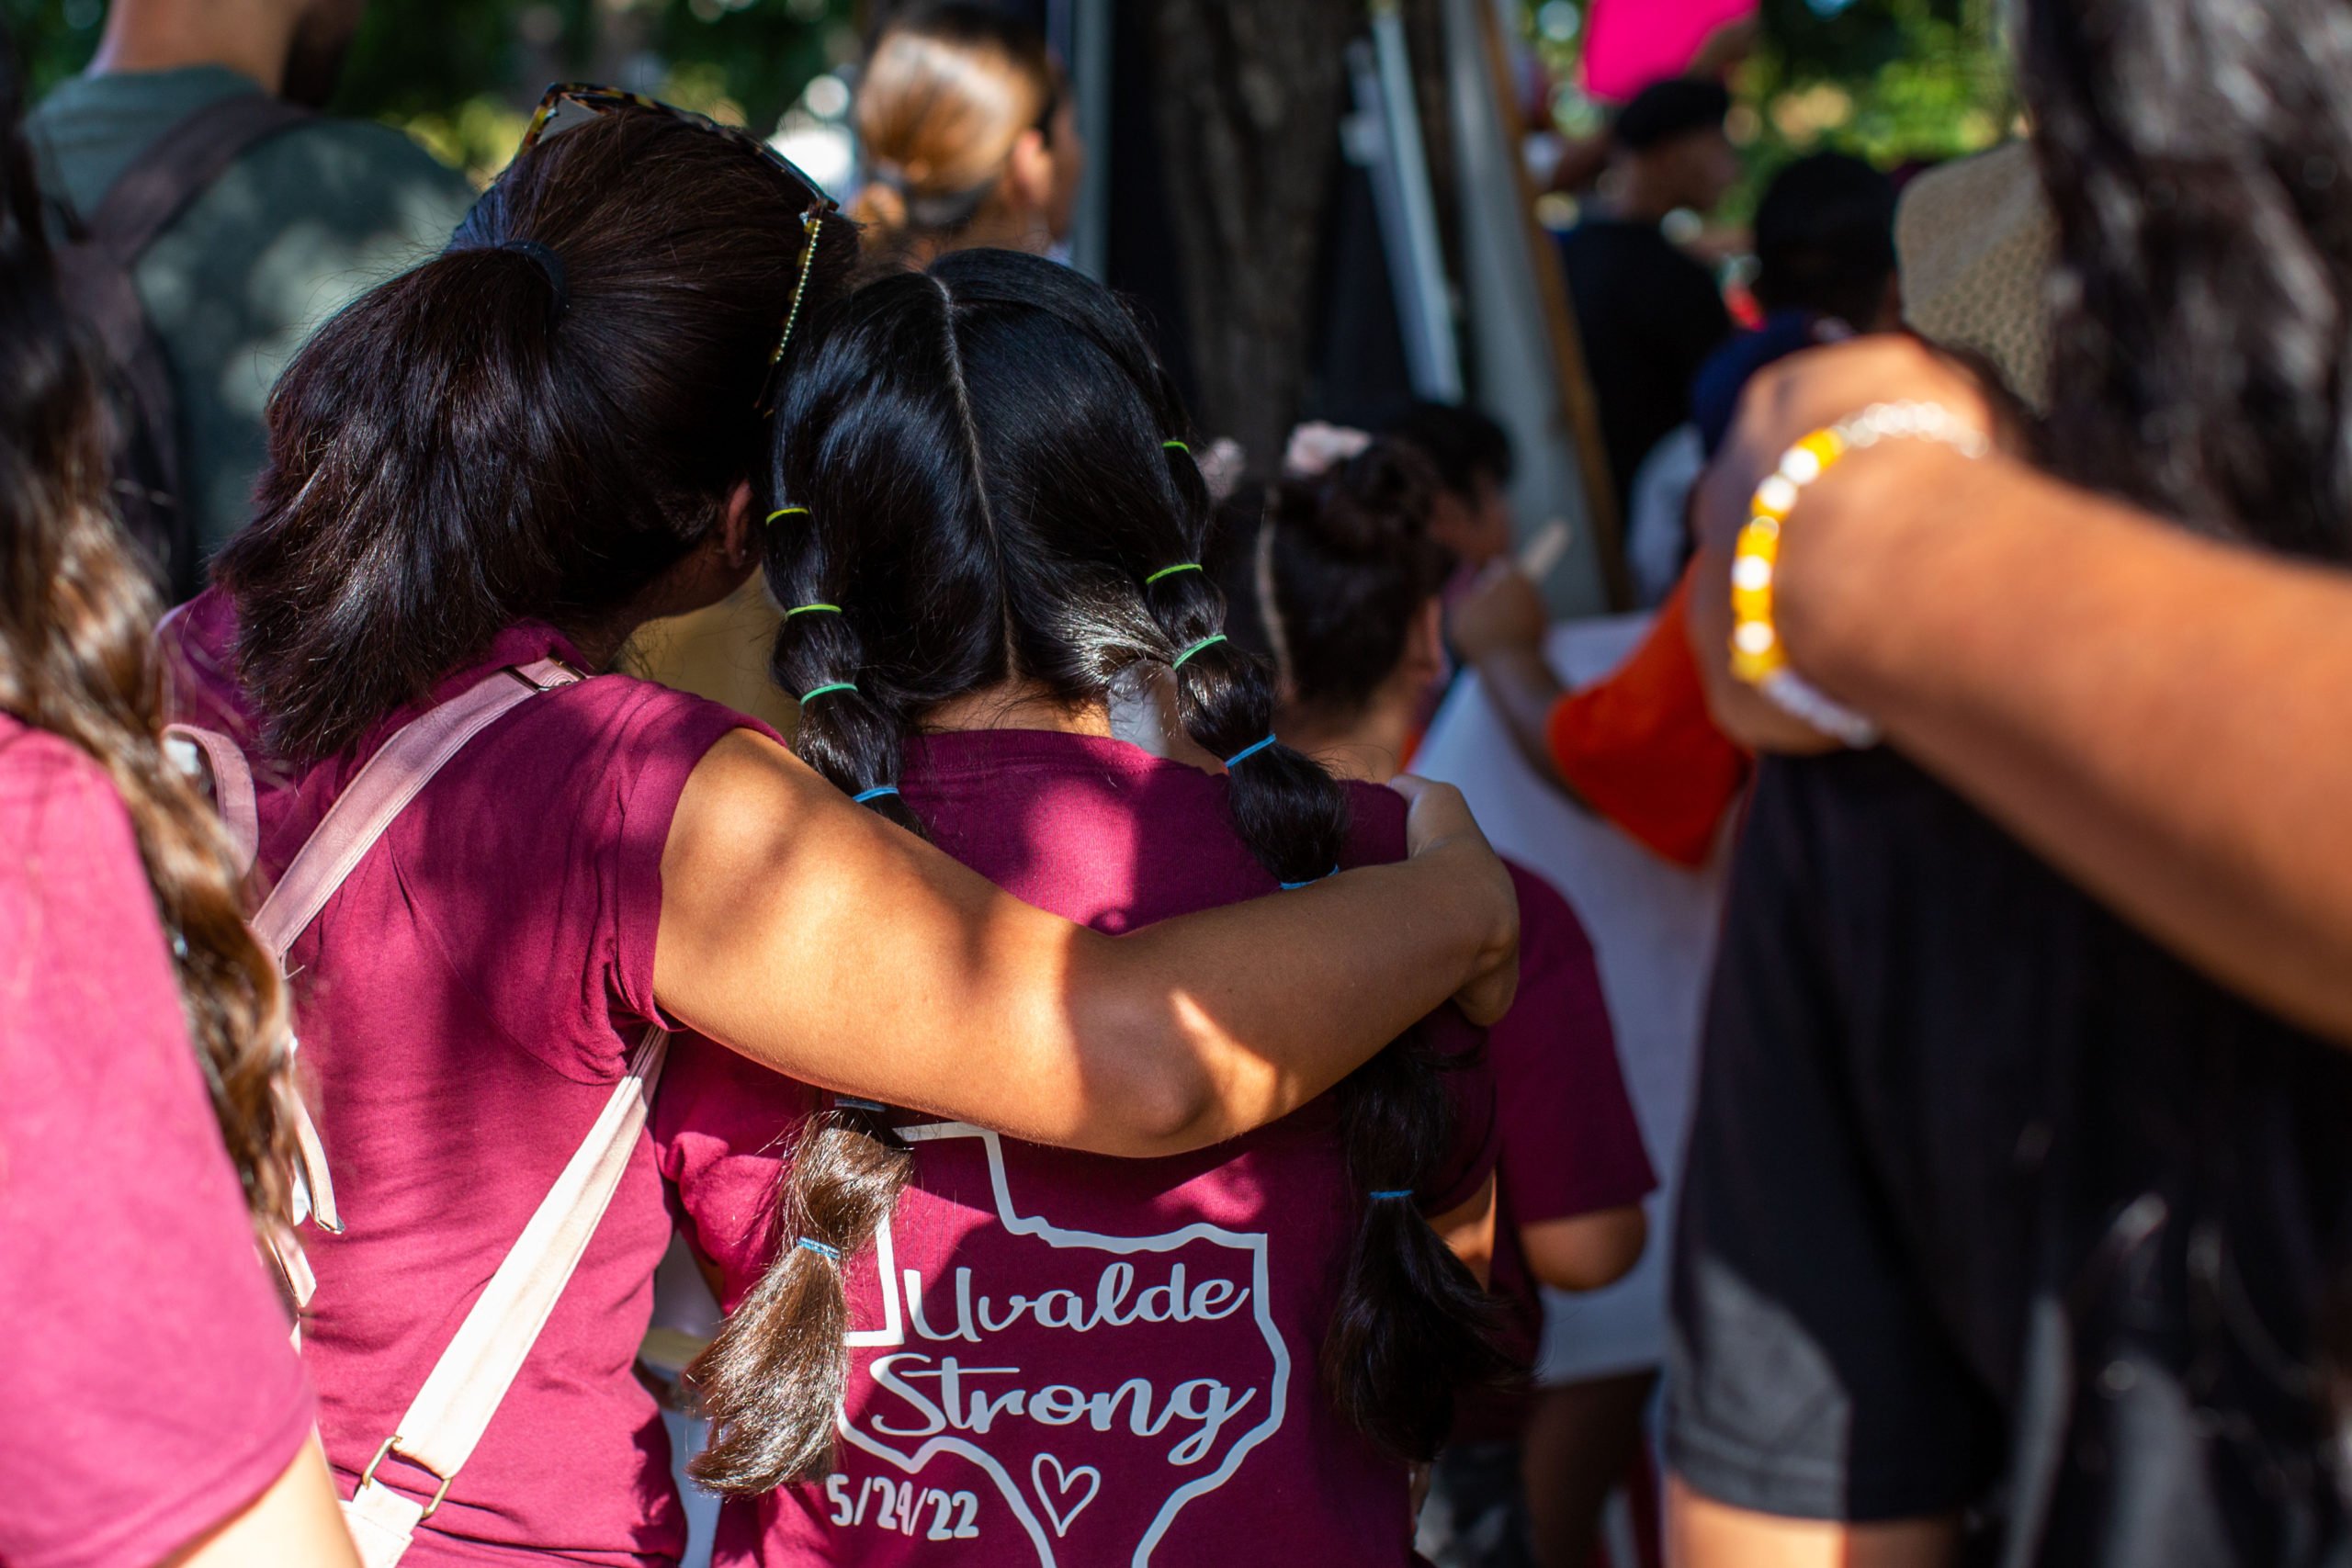 Two women embrace at the Unheard Voices March & Rally for the 21 victims of the Robb Elementary mass shooting in Uvalde, Texas, on July 11, 2022. They are wearing red "Uvalde Strong" t-shirts.